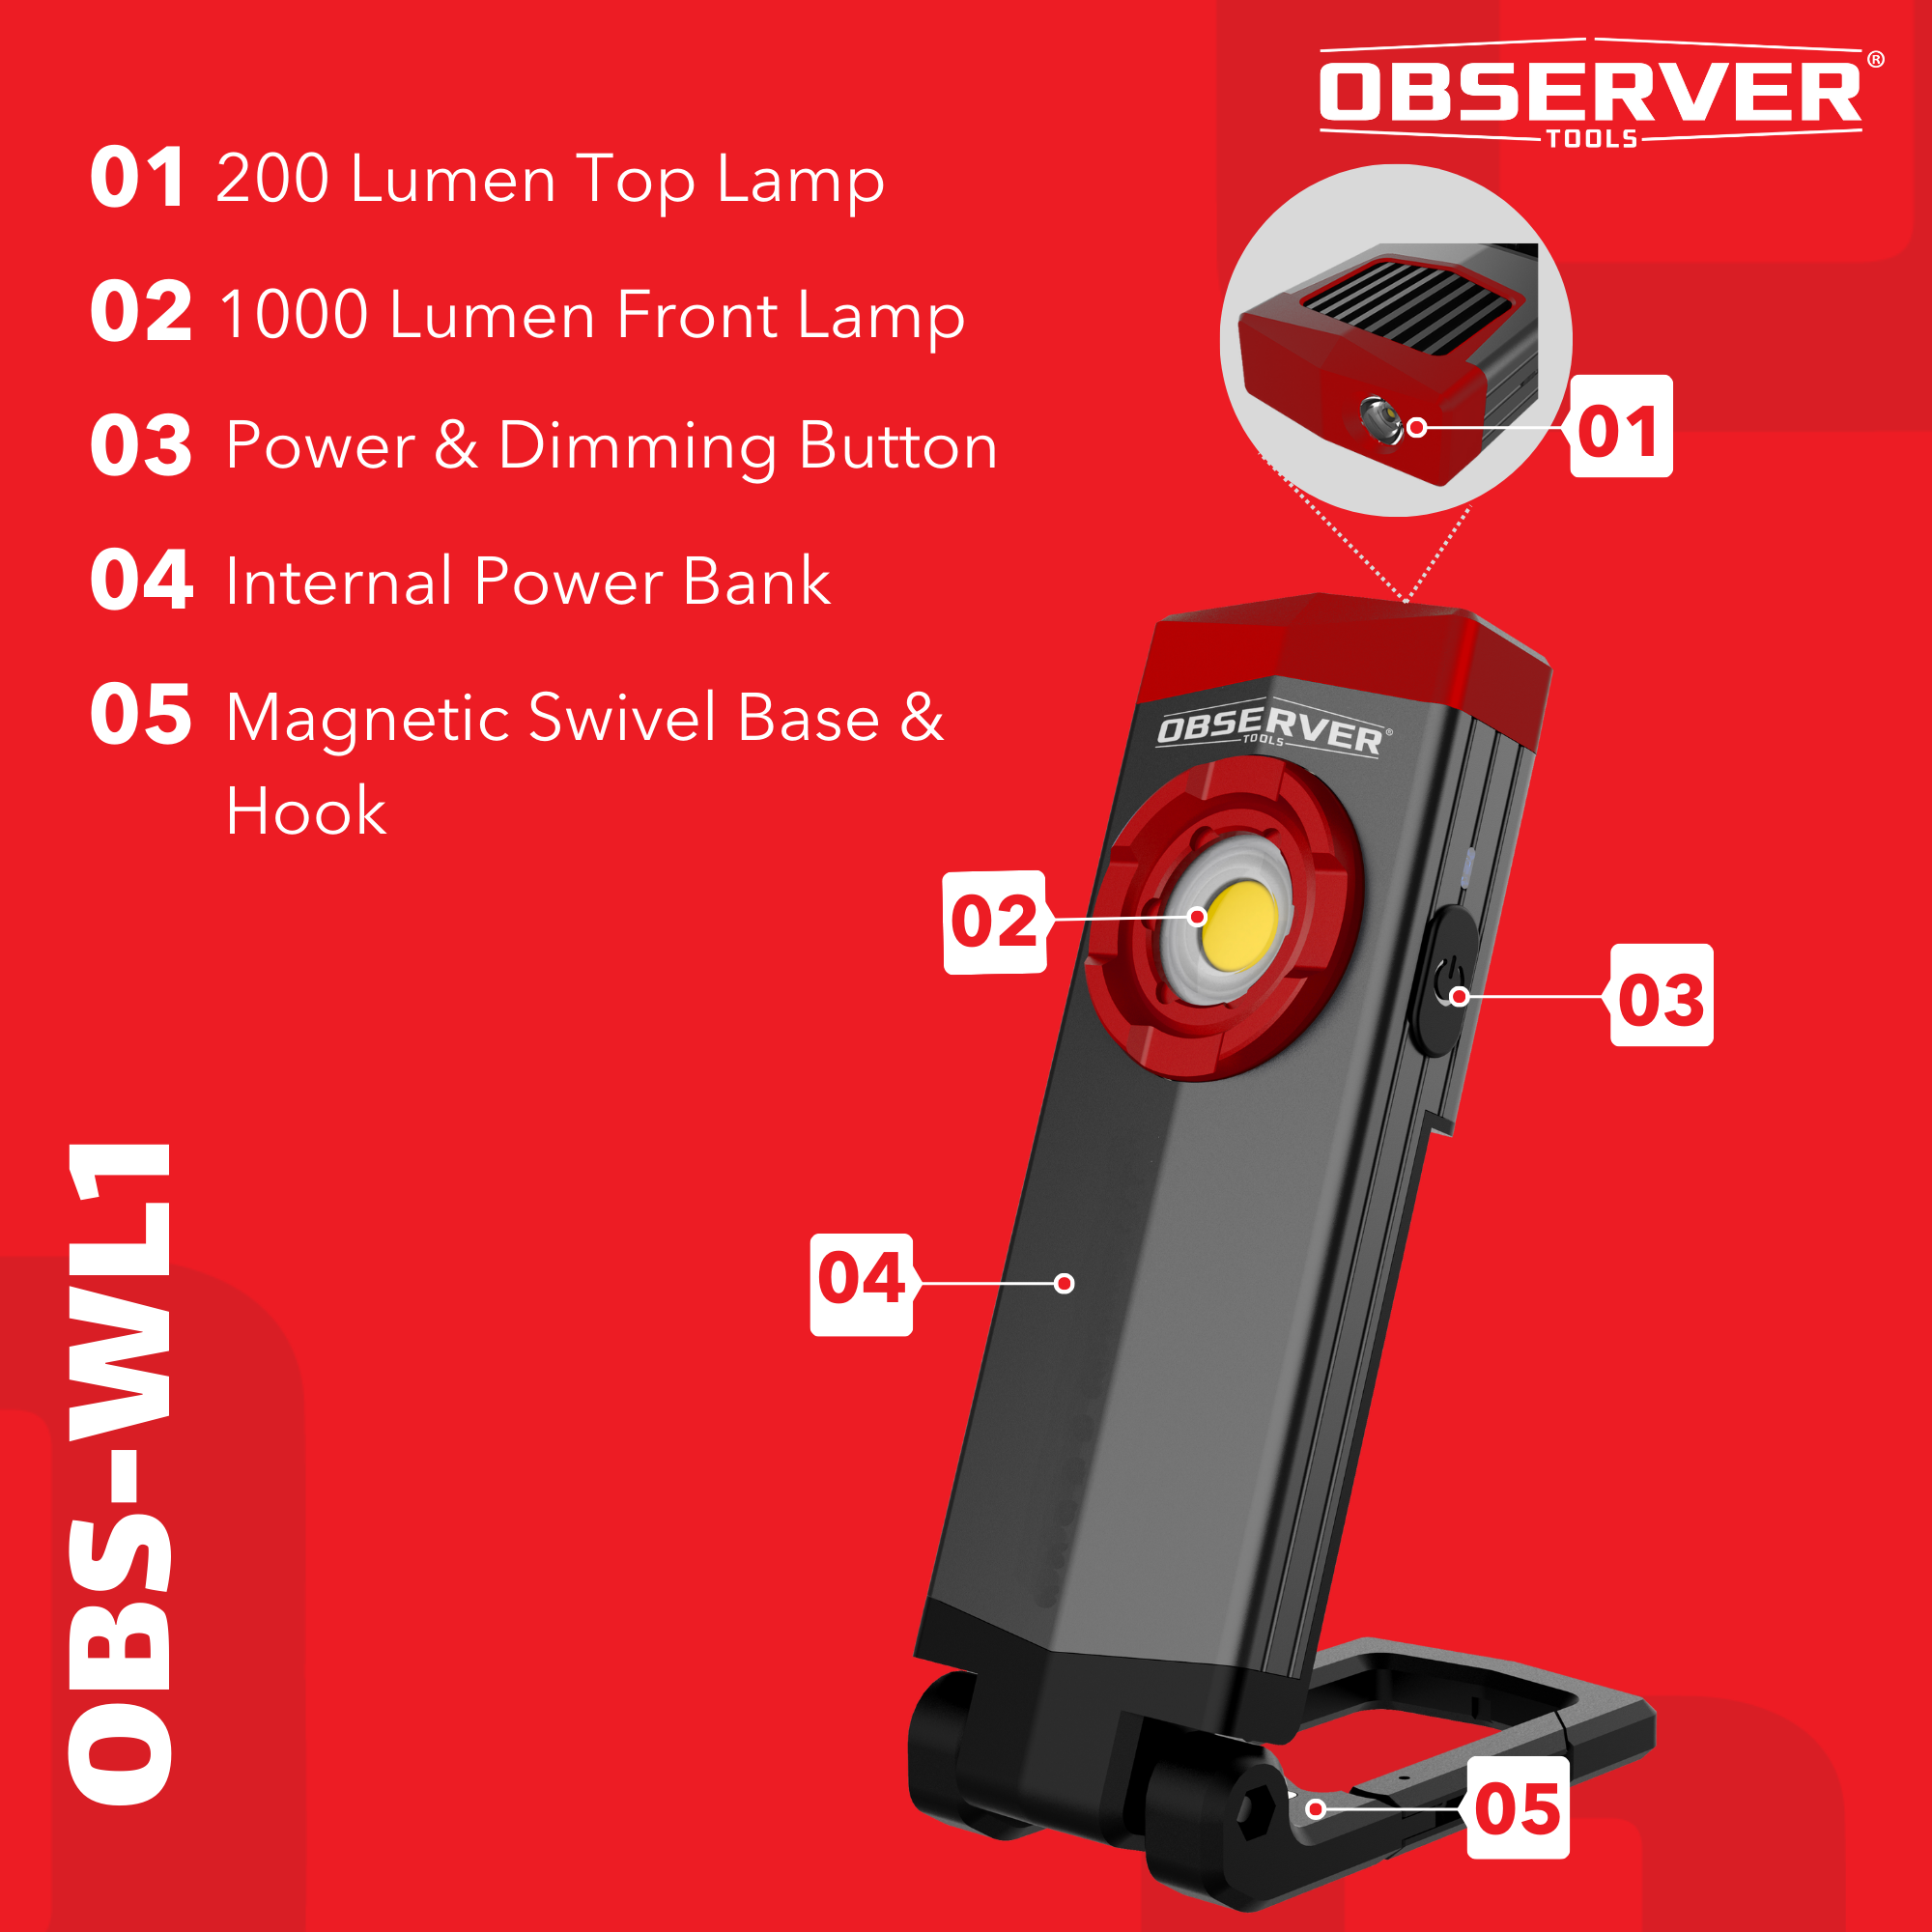 1000 Lumen Dual-Lamp LED Rechargeable Work Light with Phone Charger, Versatile Mounting and Dimming